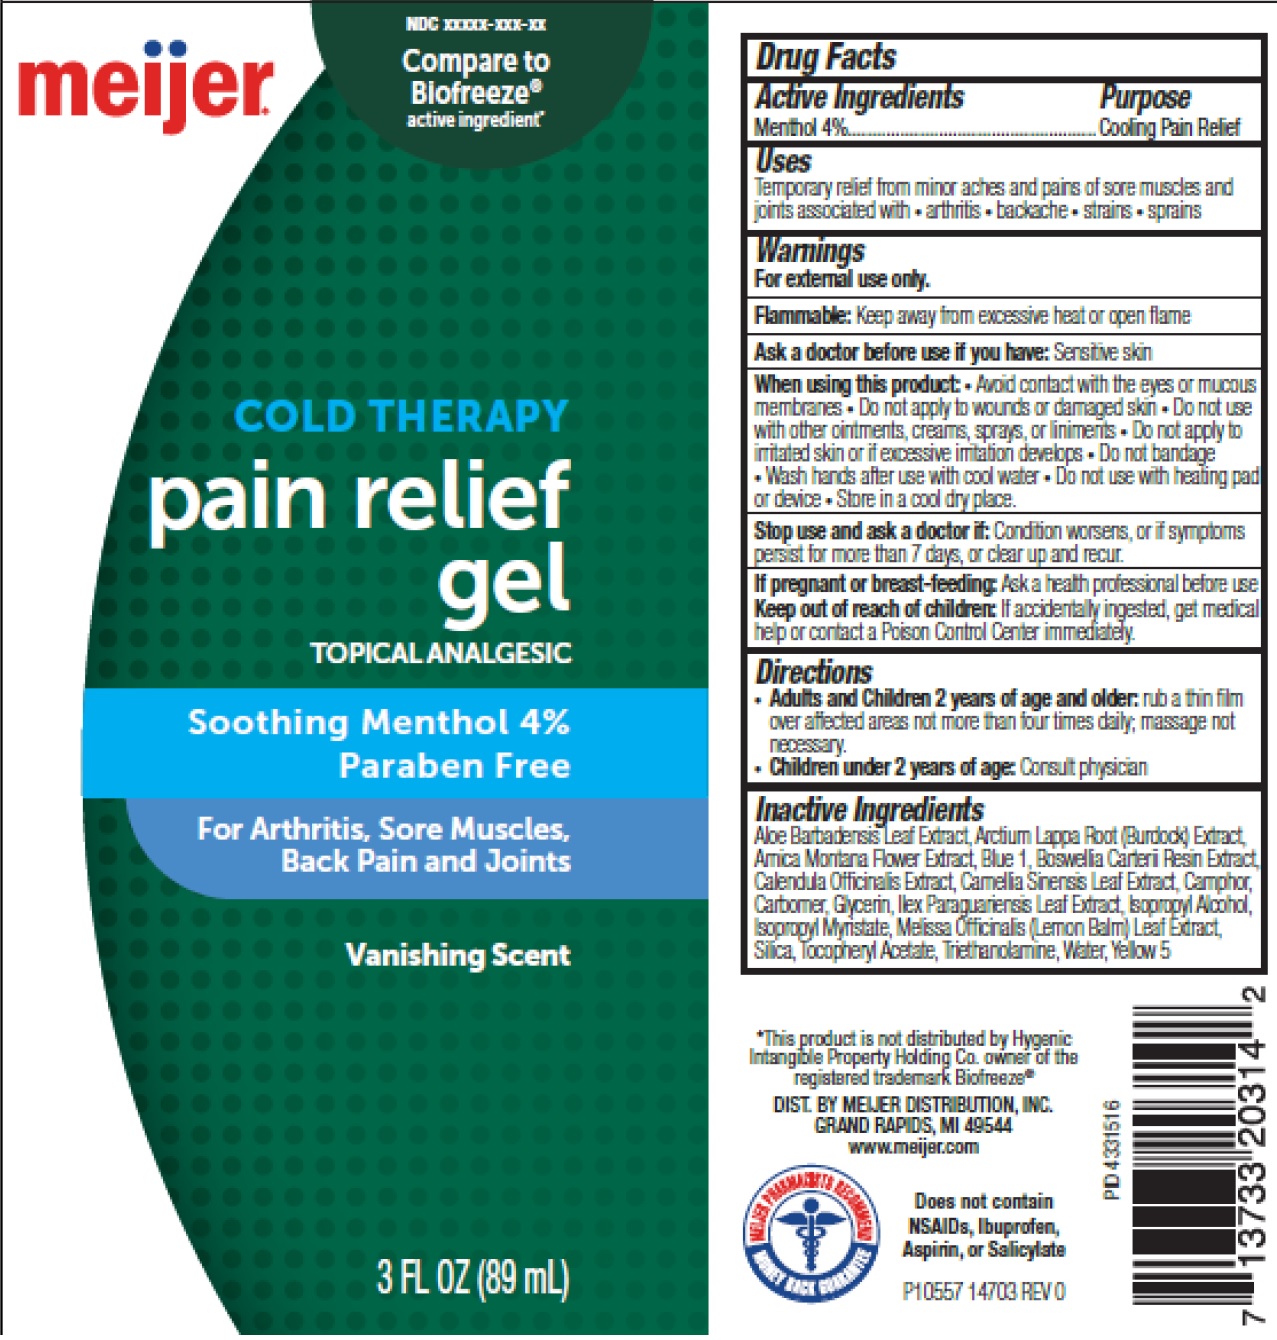 Meijer Cold Therapy Pain Relief | Menthol Gel while Breastfeeding